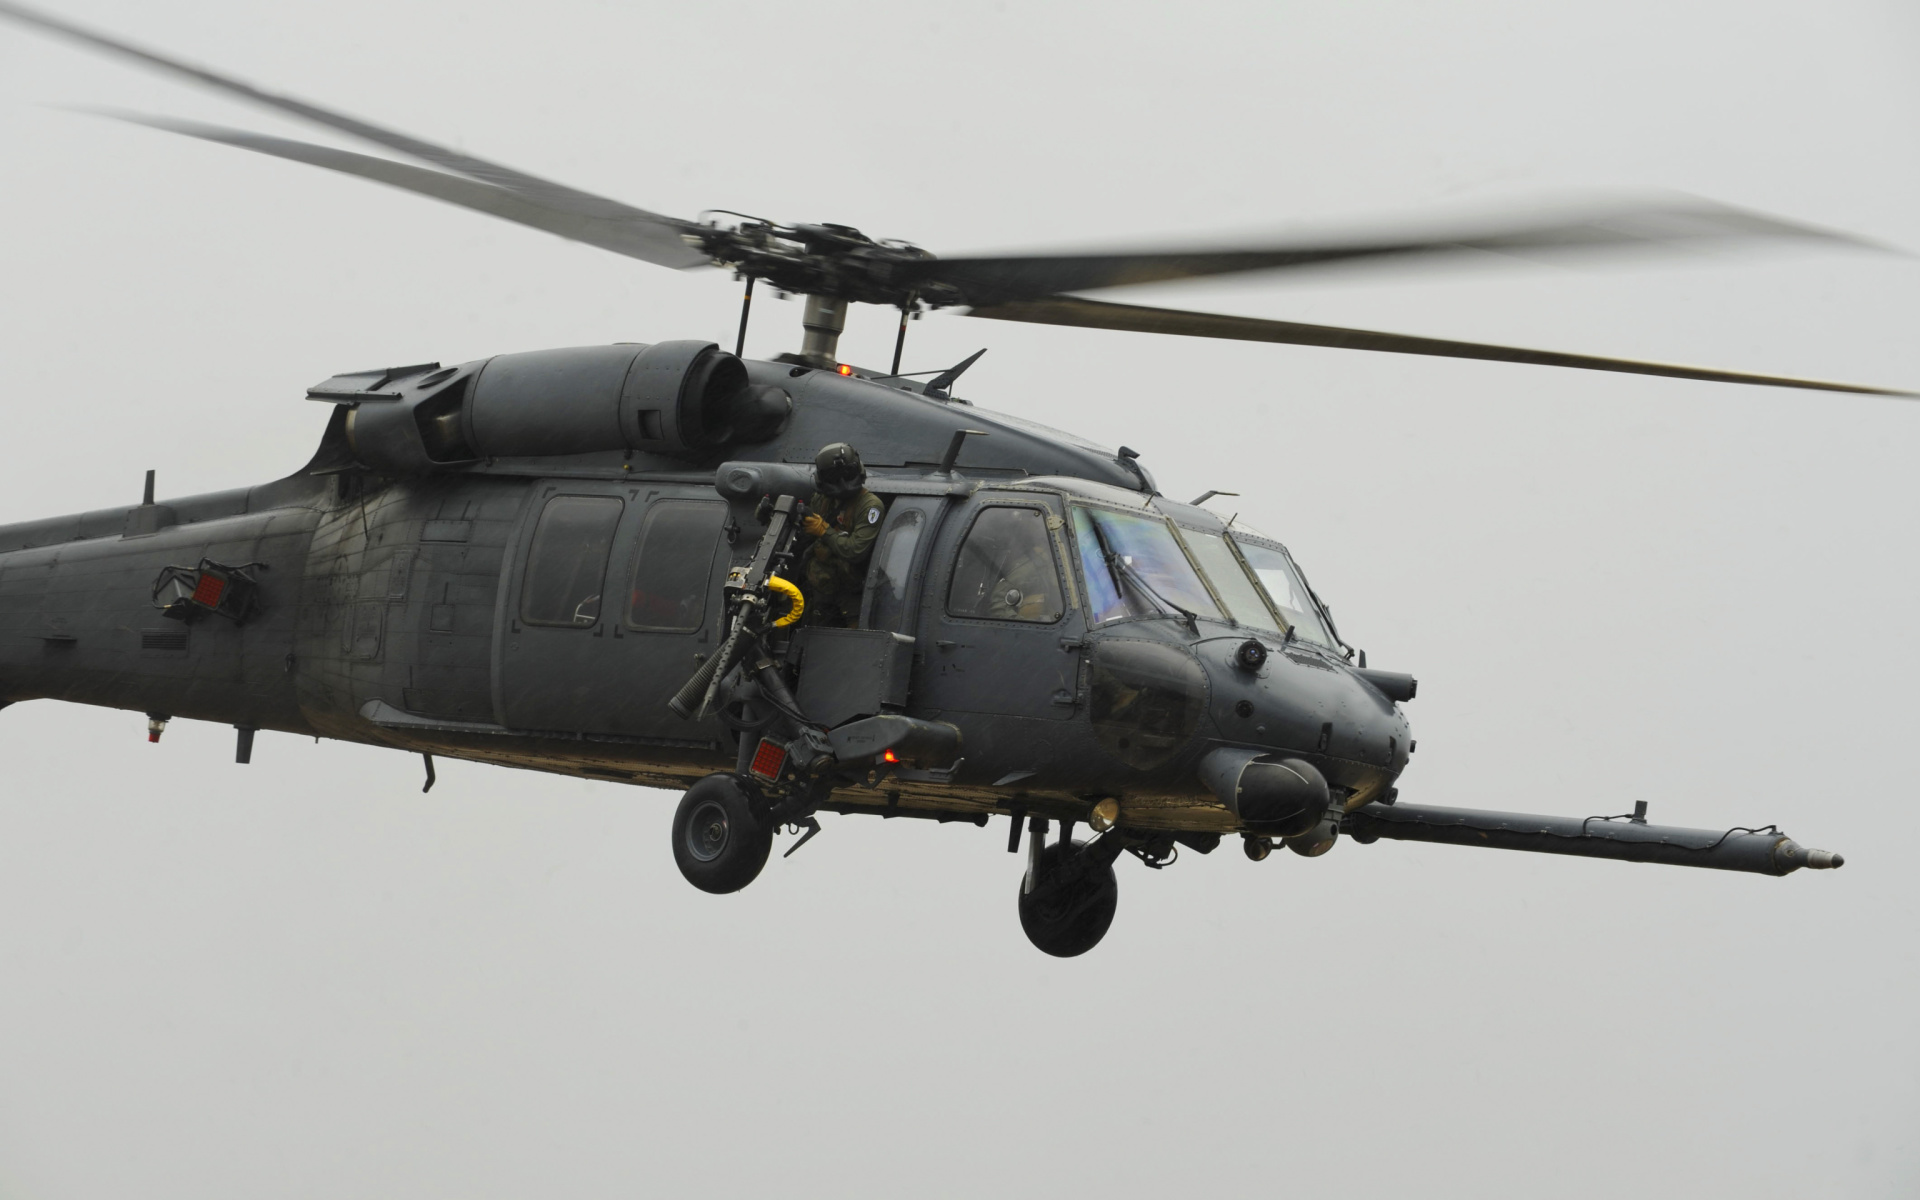 Das Helicopter Sikorsky HH 60 Pave Hawk Wallpaper 1920x1200